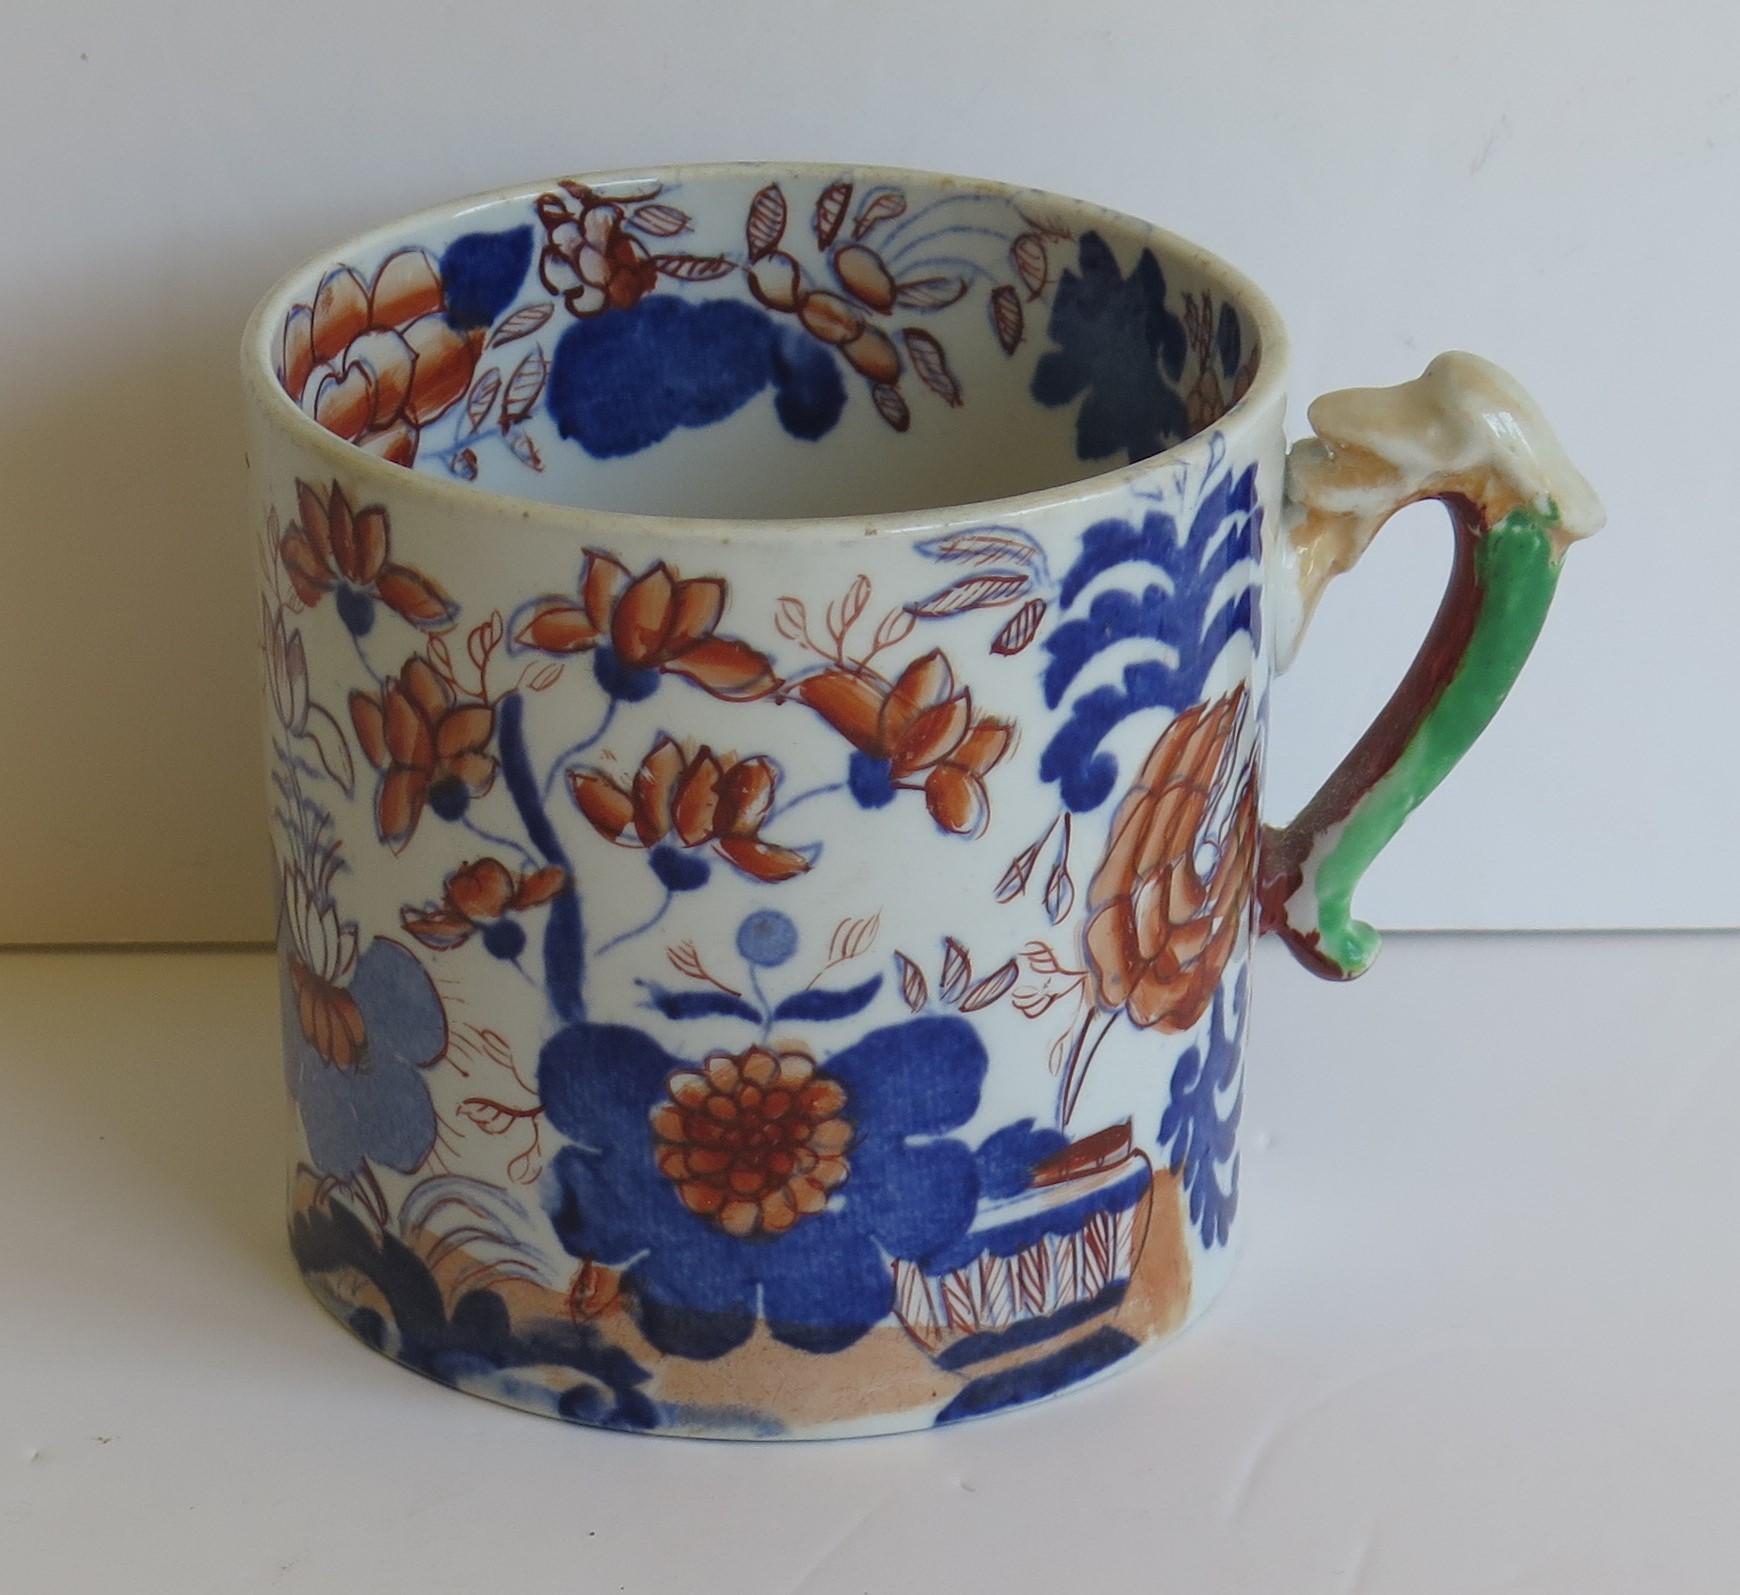 This is a good Ironstone pottery mug made by the English factory of Mason's Ironstone, fully marked and dating to the early 19th century, circa 1825.

Early Mason's mugs tend to be fairly rare and hard to find.

The mug is cylindrical with